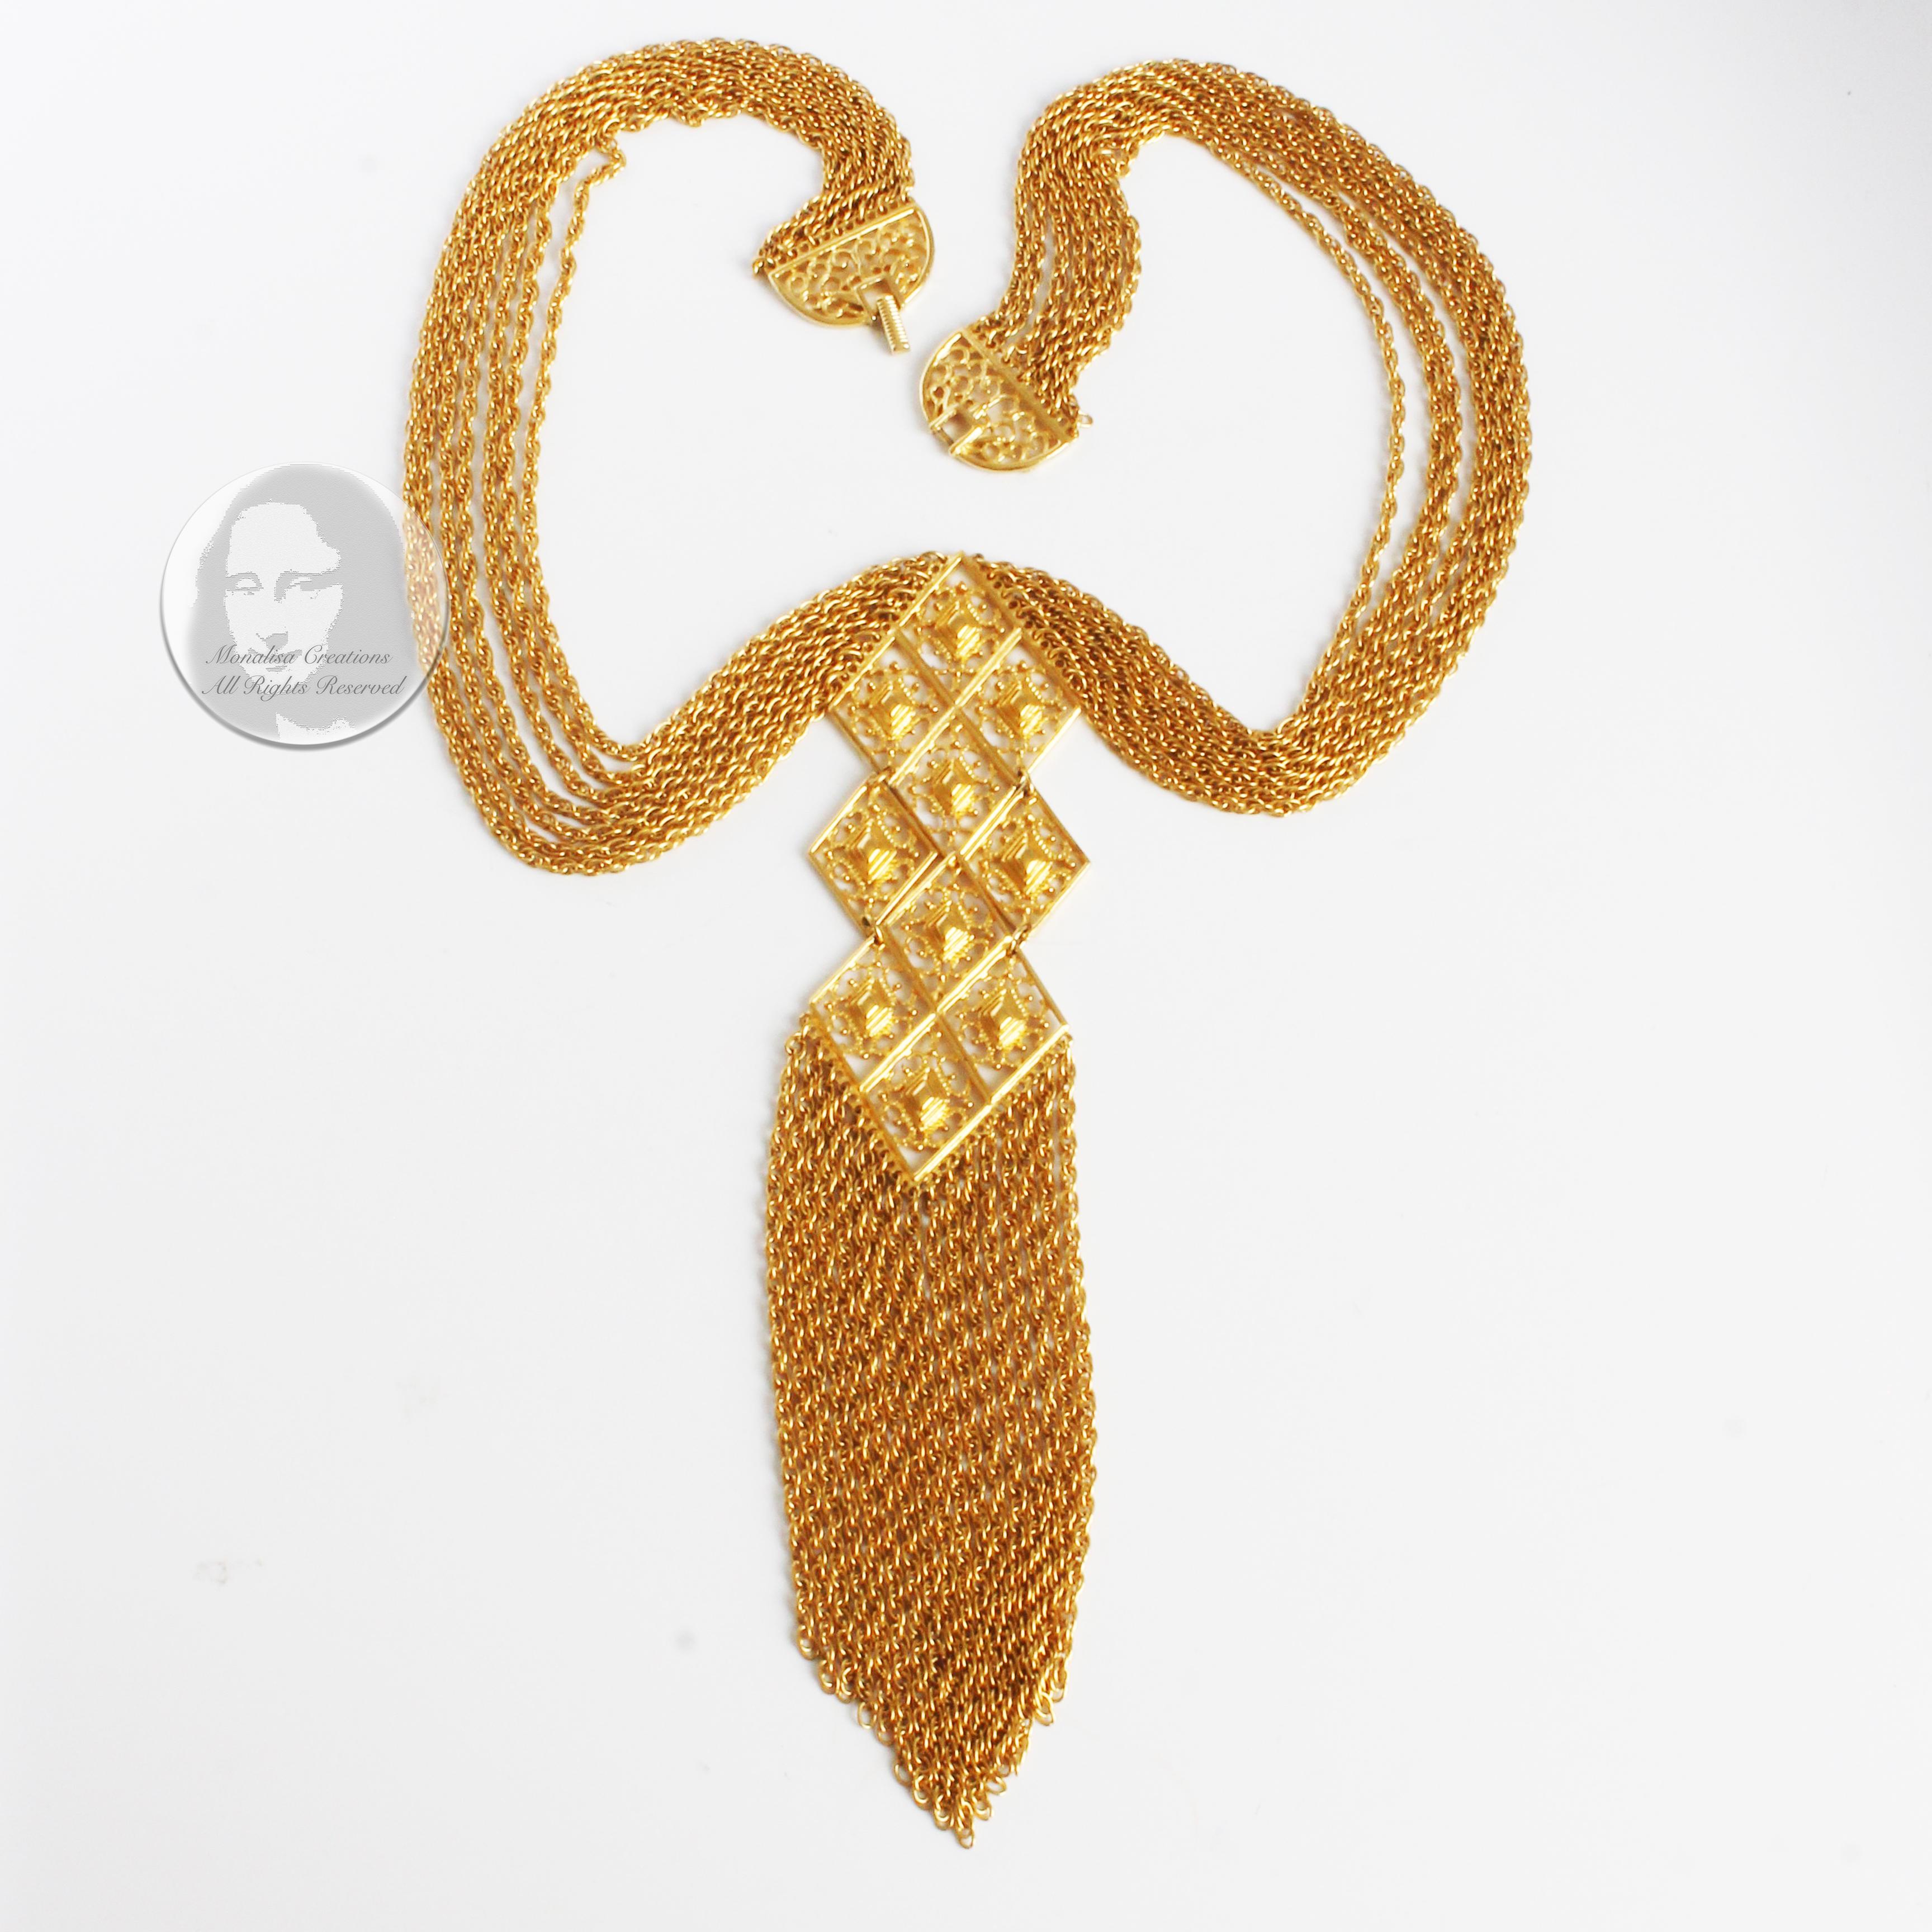 Preowned, vintage Egyptian revival style necklace, made by Goldette NY, most likely in the late 60s.  Made from multiple chain link strands, it features an articulated gold metal pendant with decorative diamond-shaped pieces and gold dangle fringe